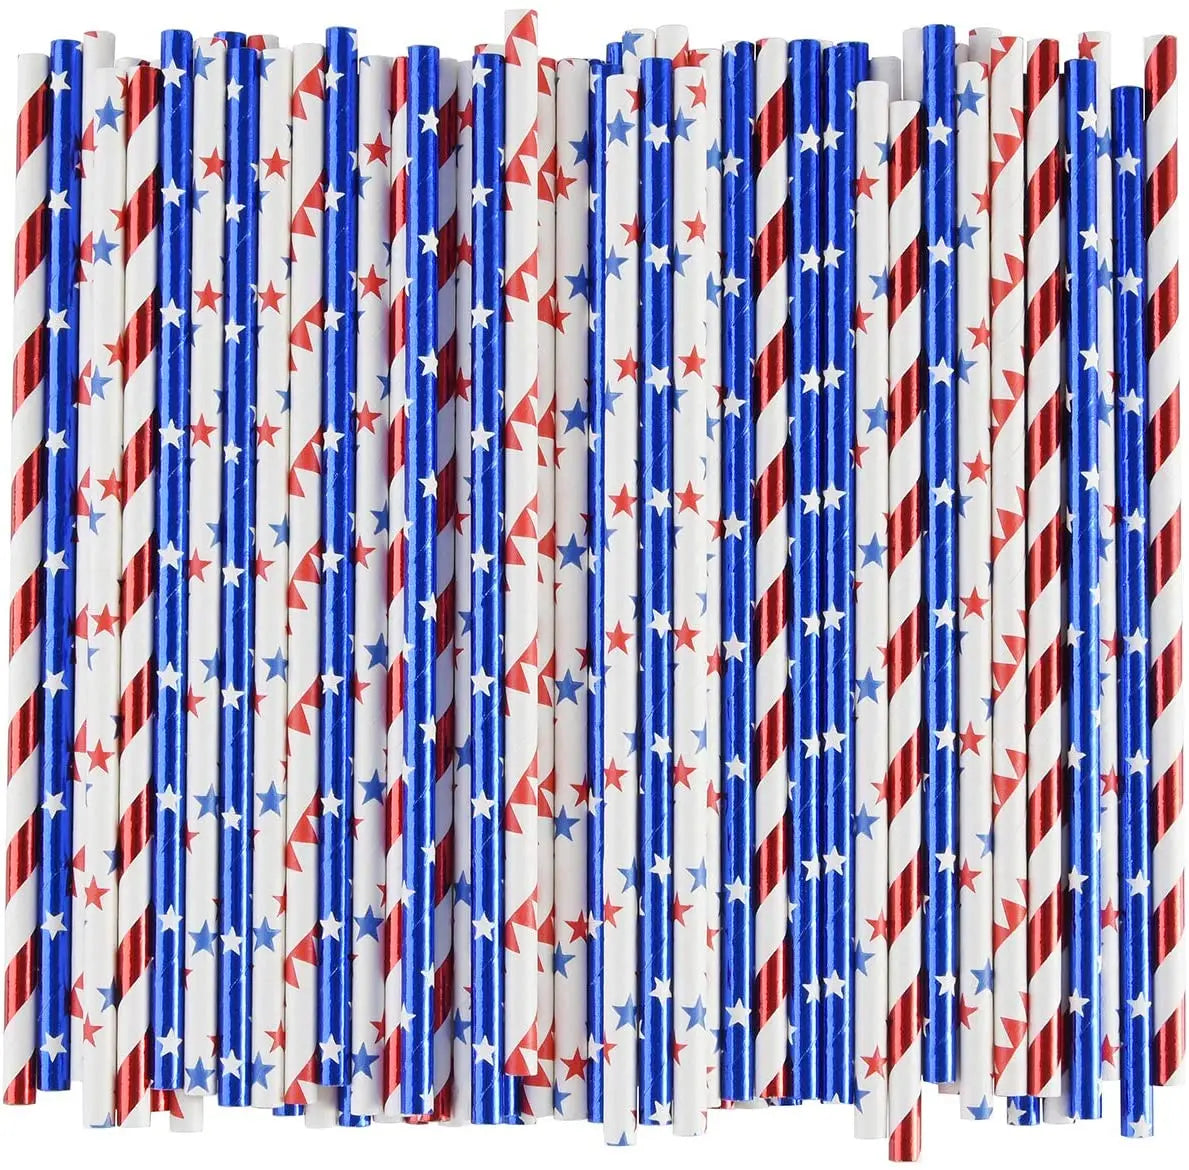 Omilut 10pcs American Straws 4th of July Independence Day Straws American Flag Patriotic Party Disposable Tableware Set Supplies